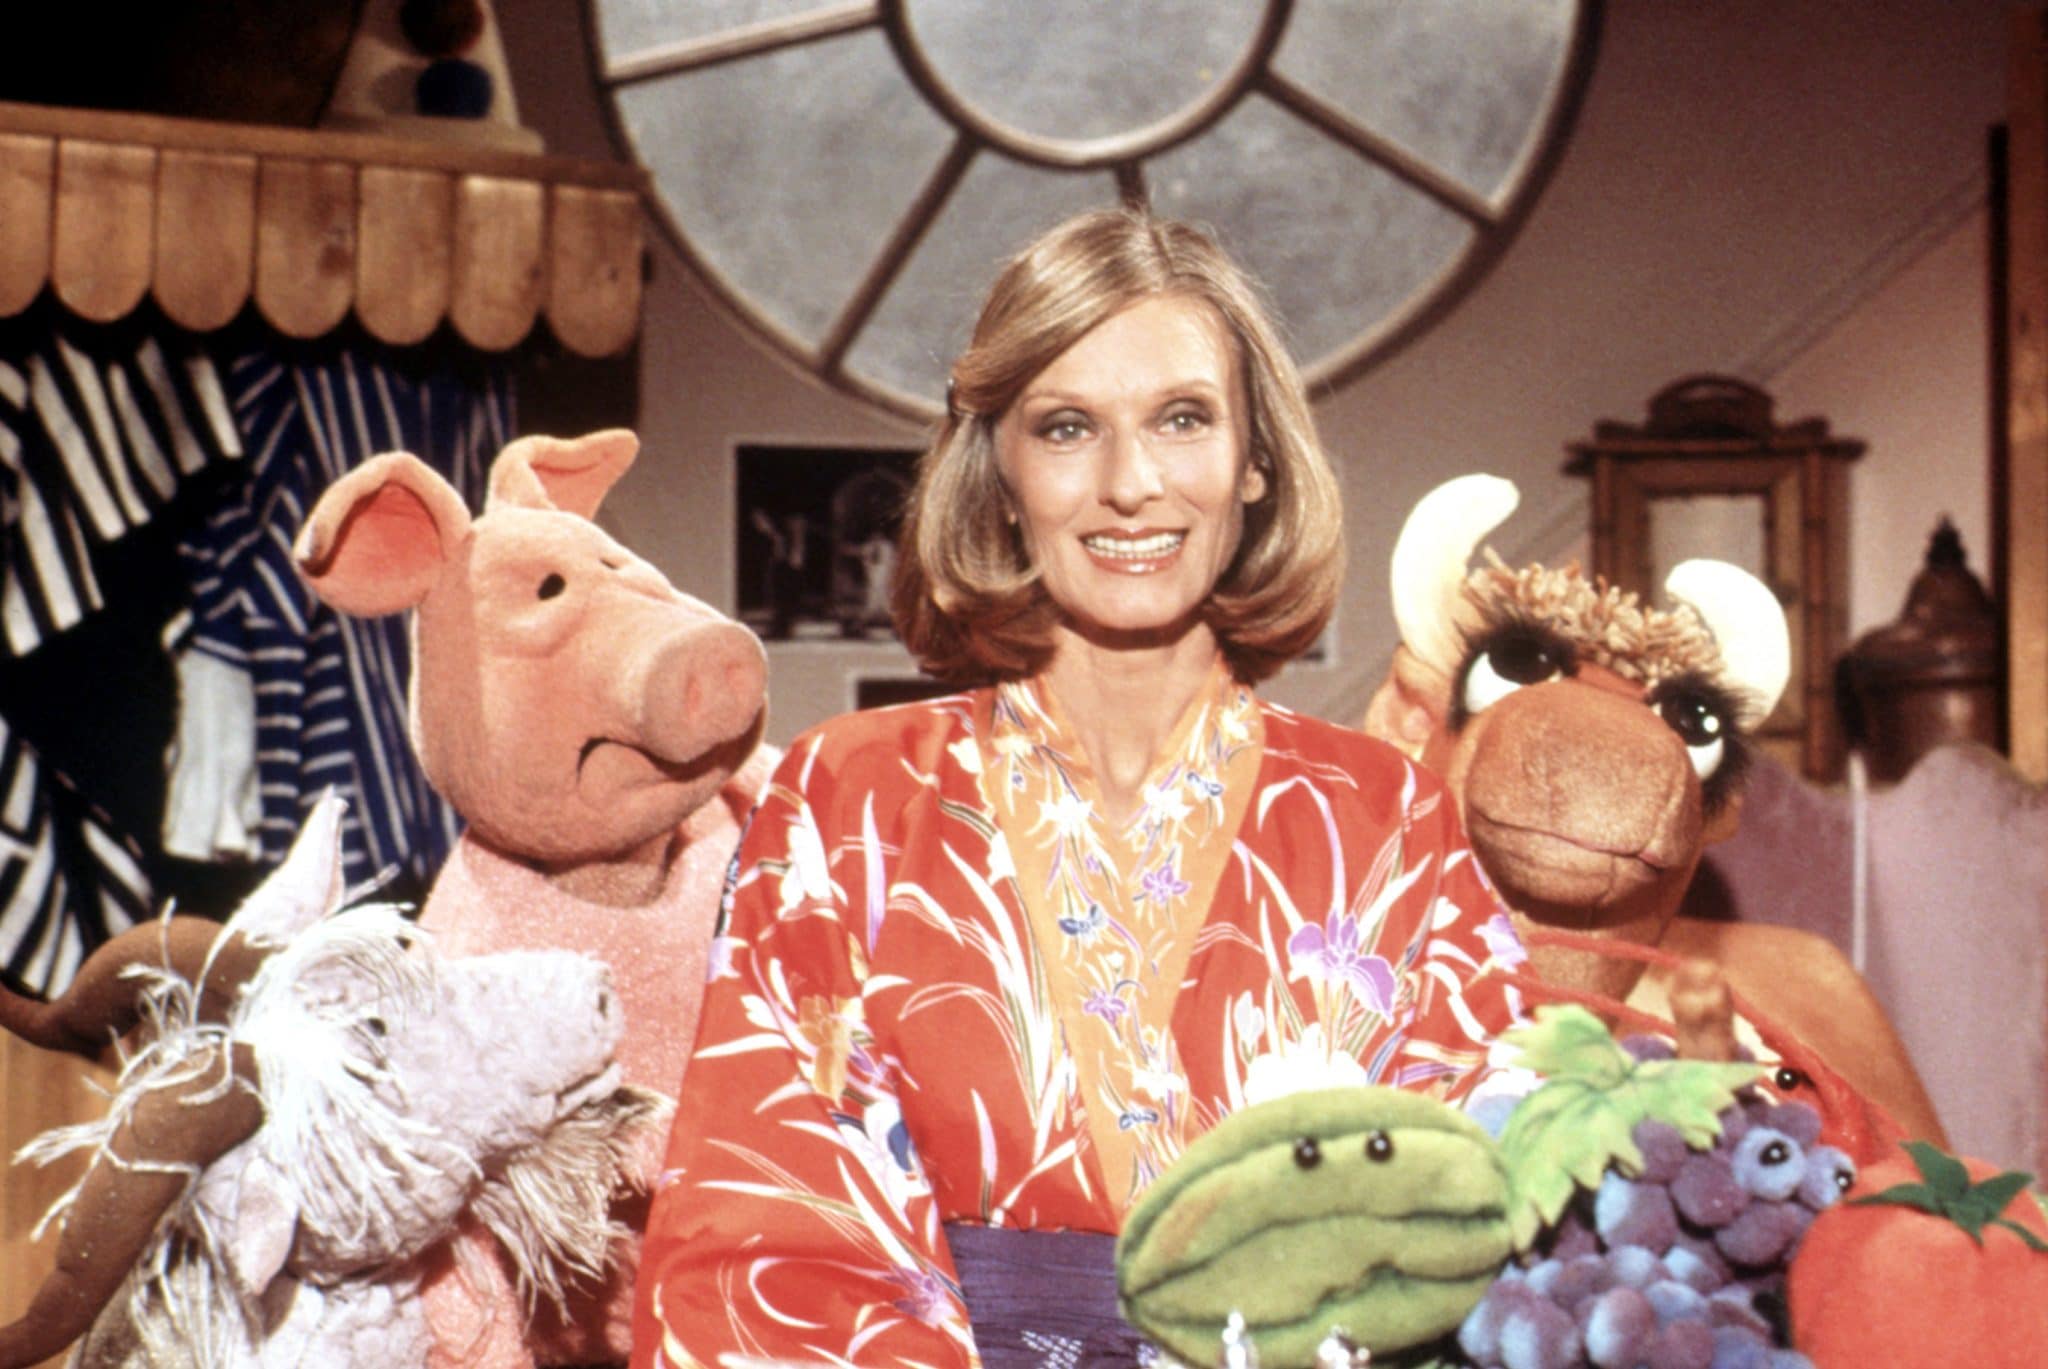 Fun Facts About The Late Actress Cloris Leachman